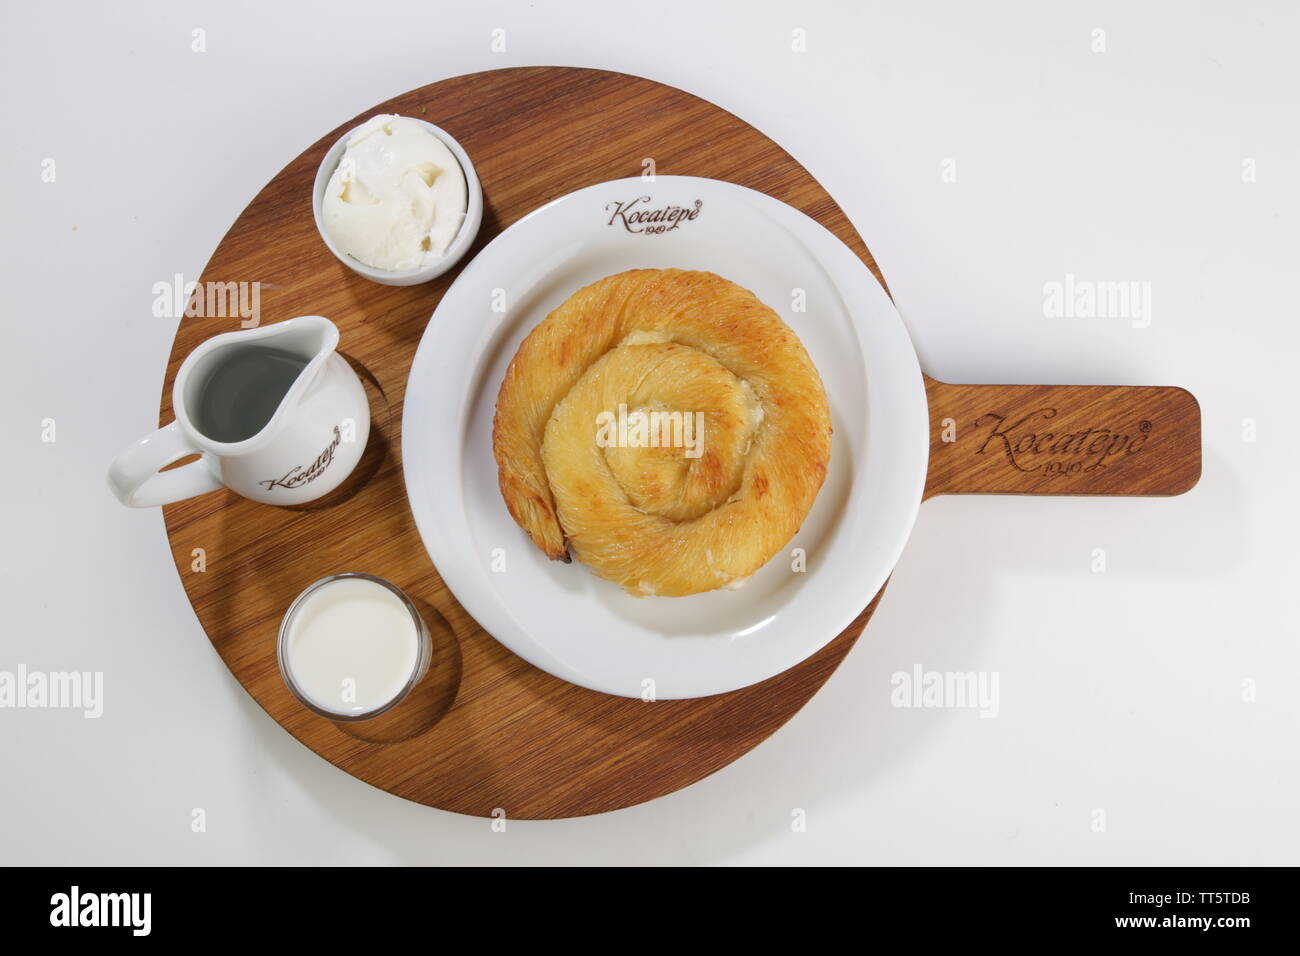 rolled pastry called borek top view served with milk turkish style Stock Photo